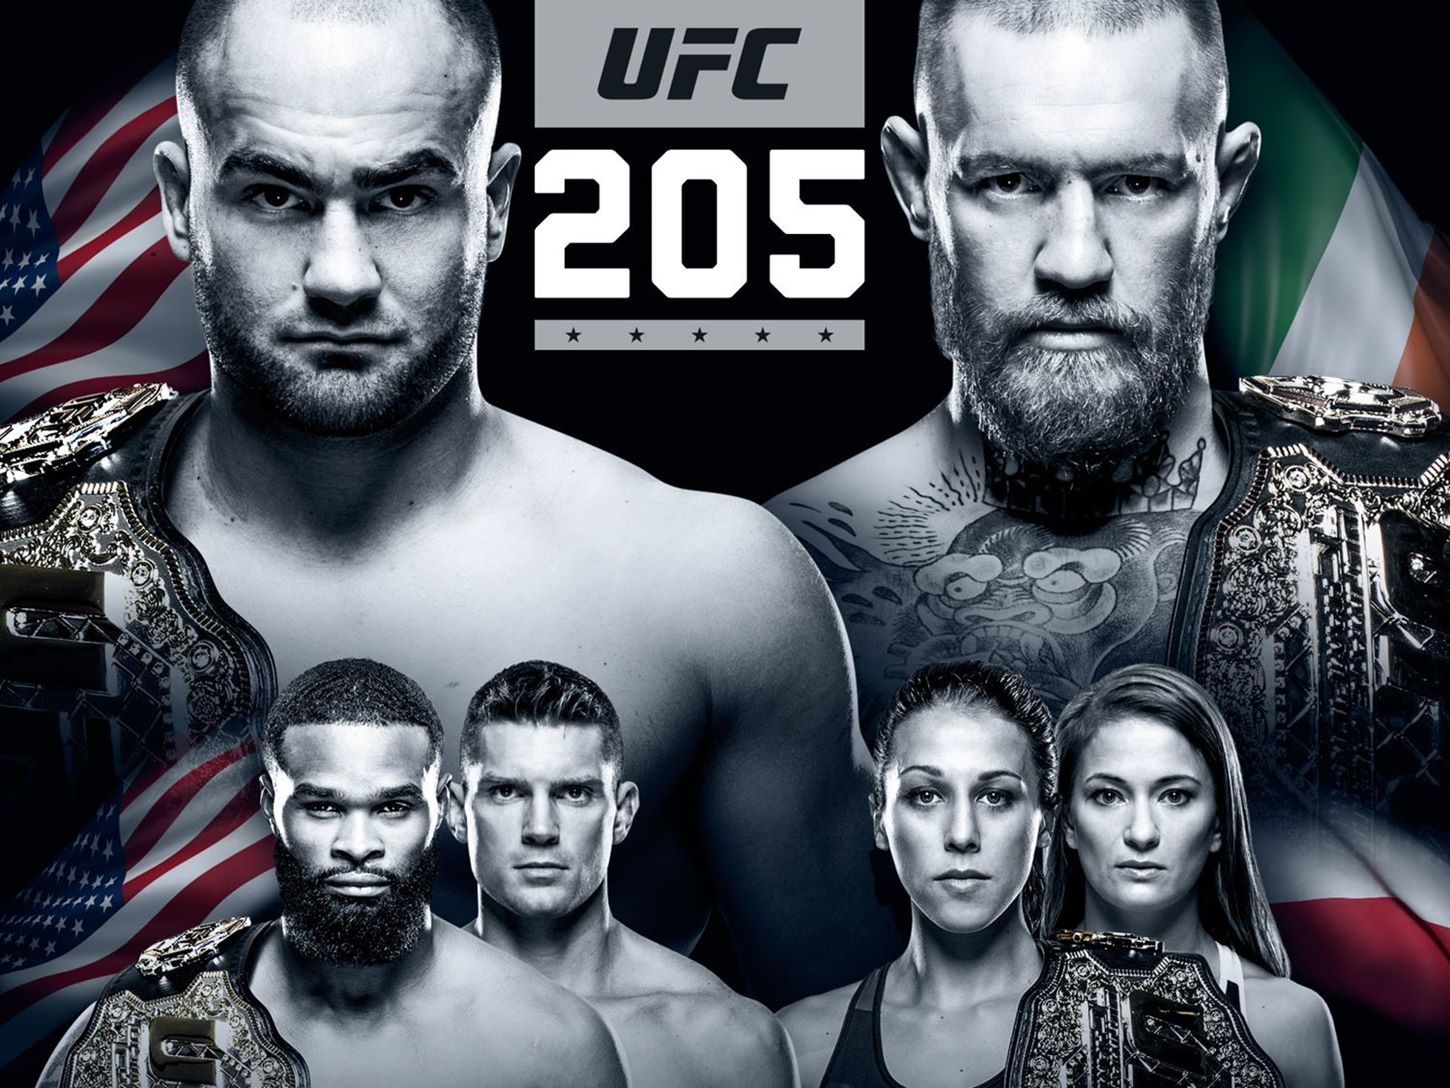 How To Watch UFC 205